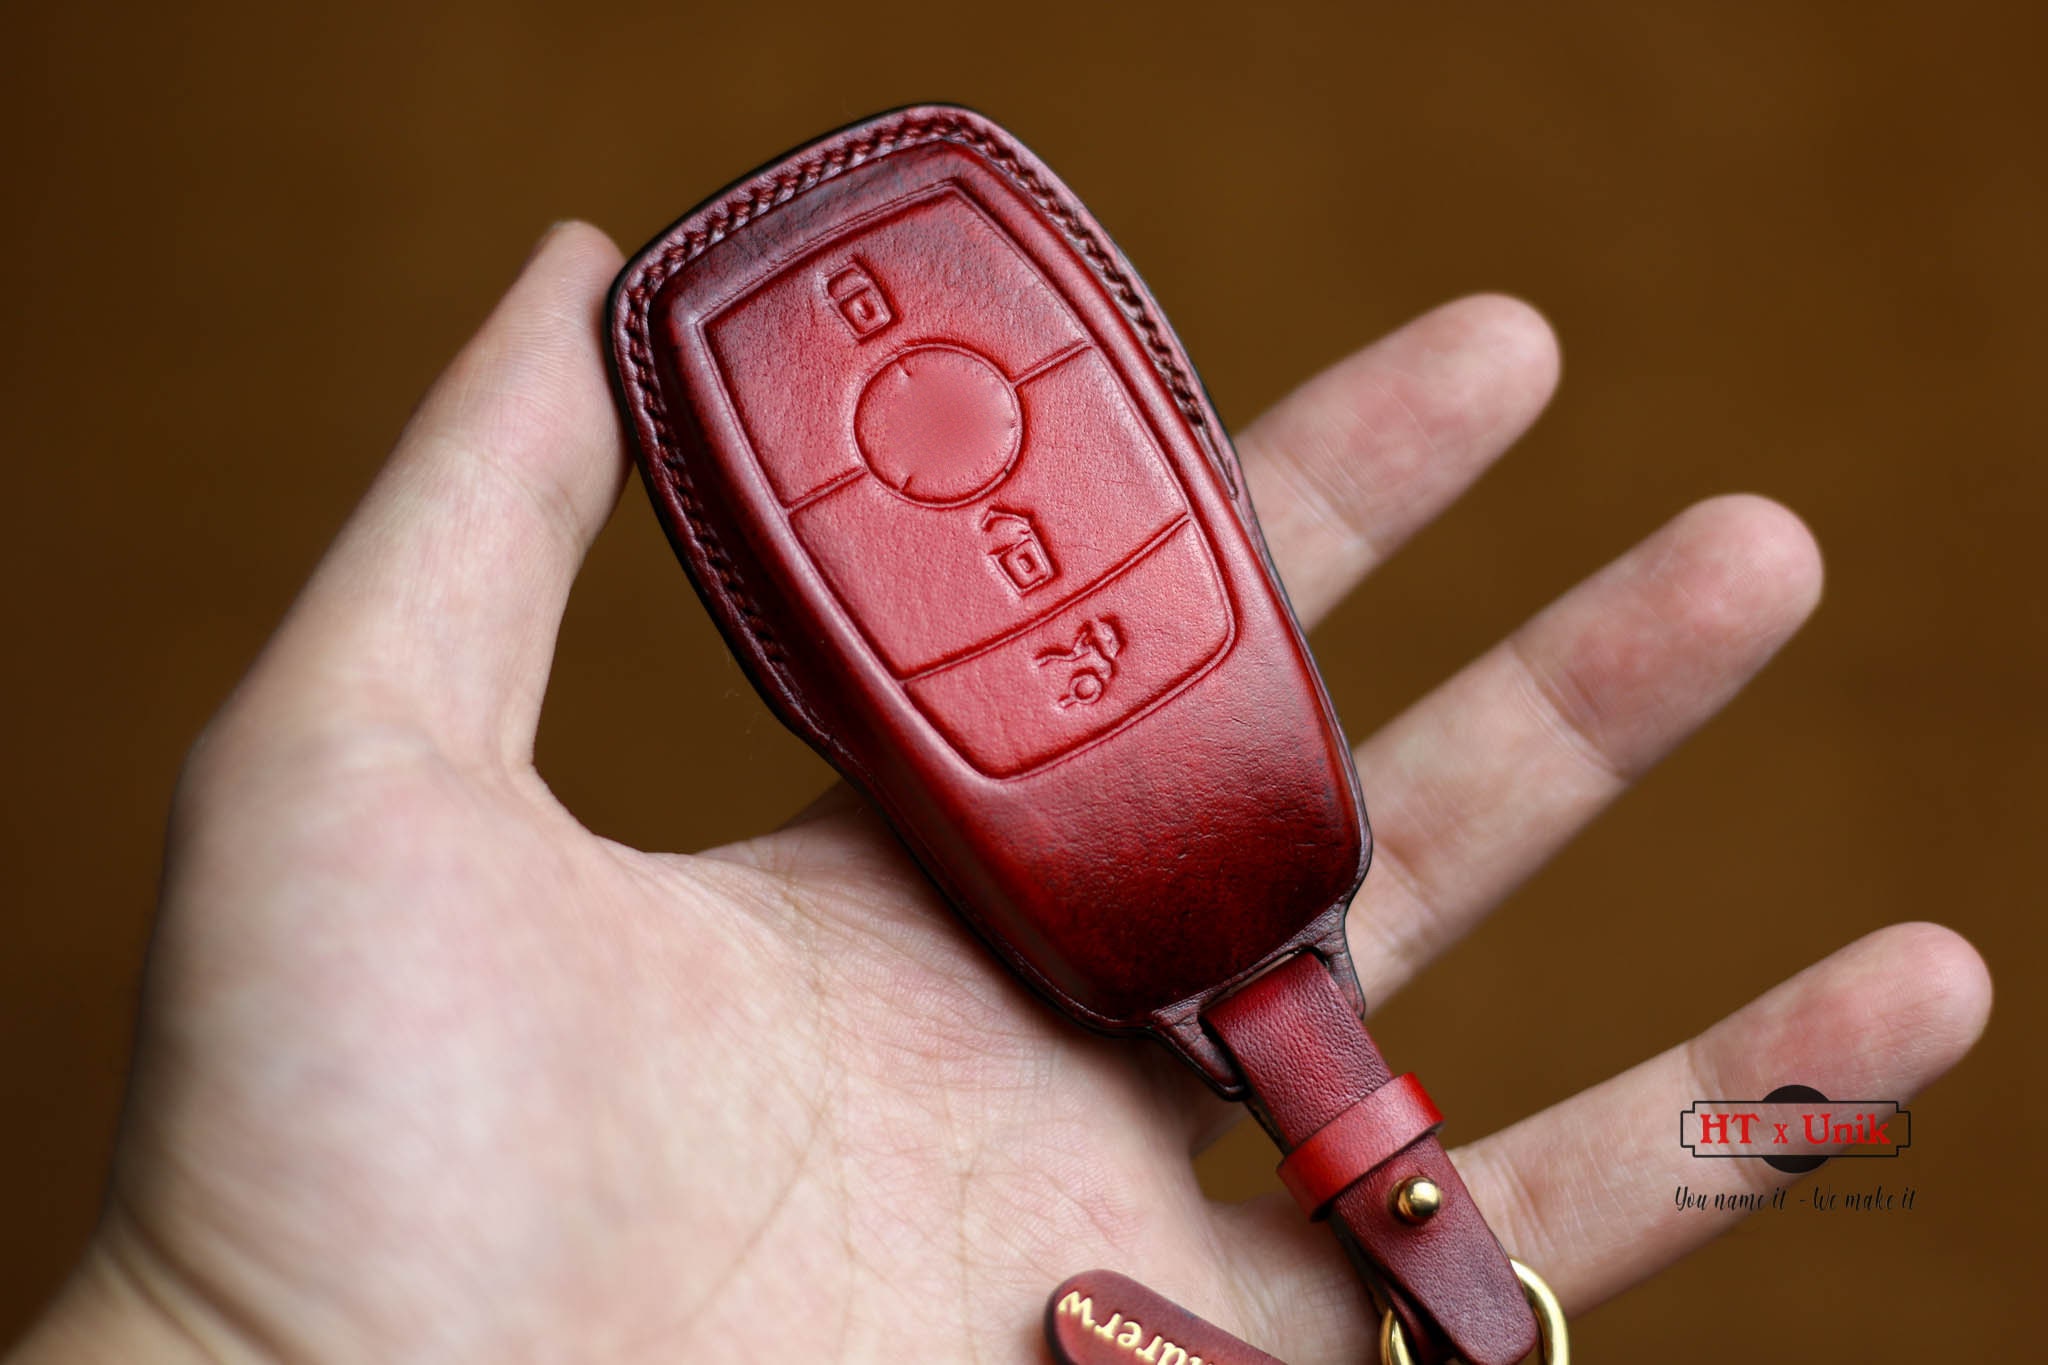  Ready to Ship Coaster Genuine Leather Key Cover in  Purple Pebble Grain for Mercedes Benz Keyless Key Fob